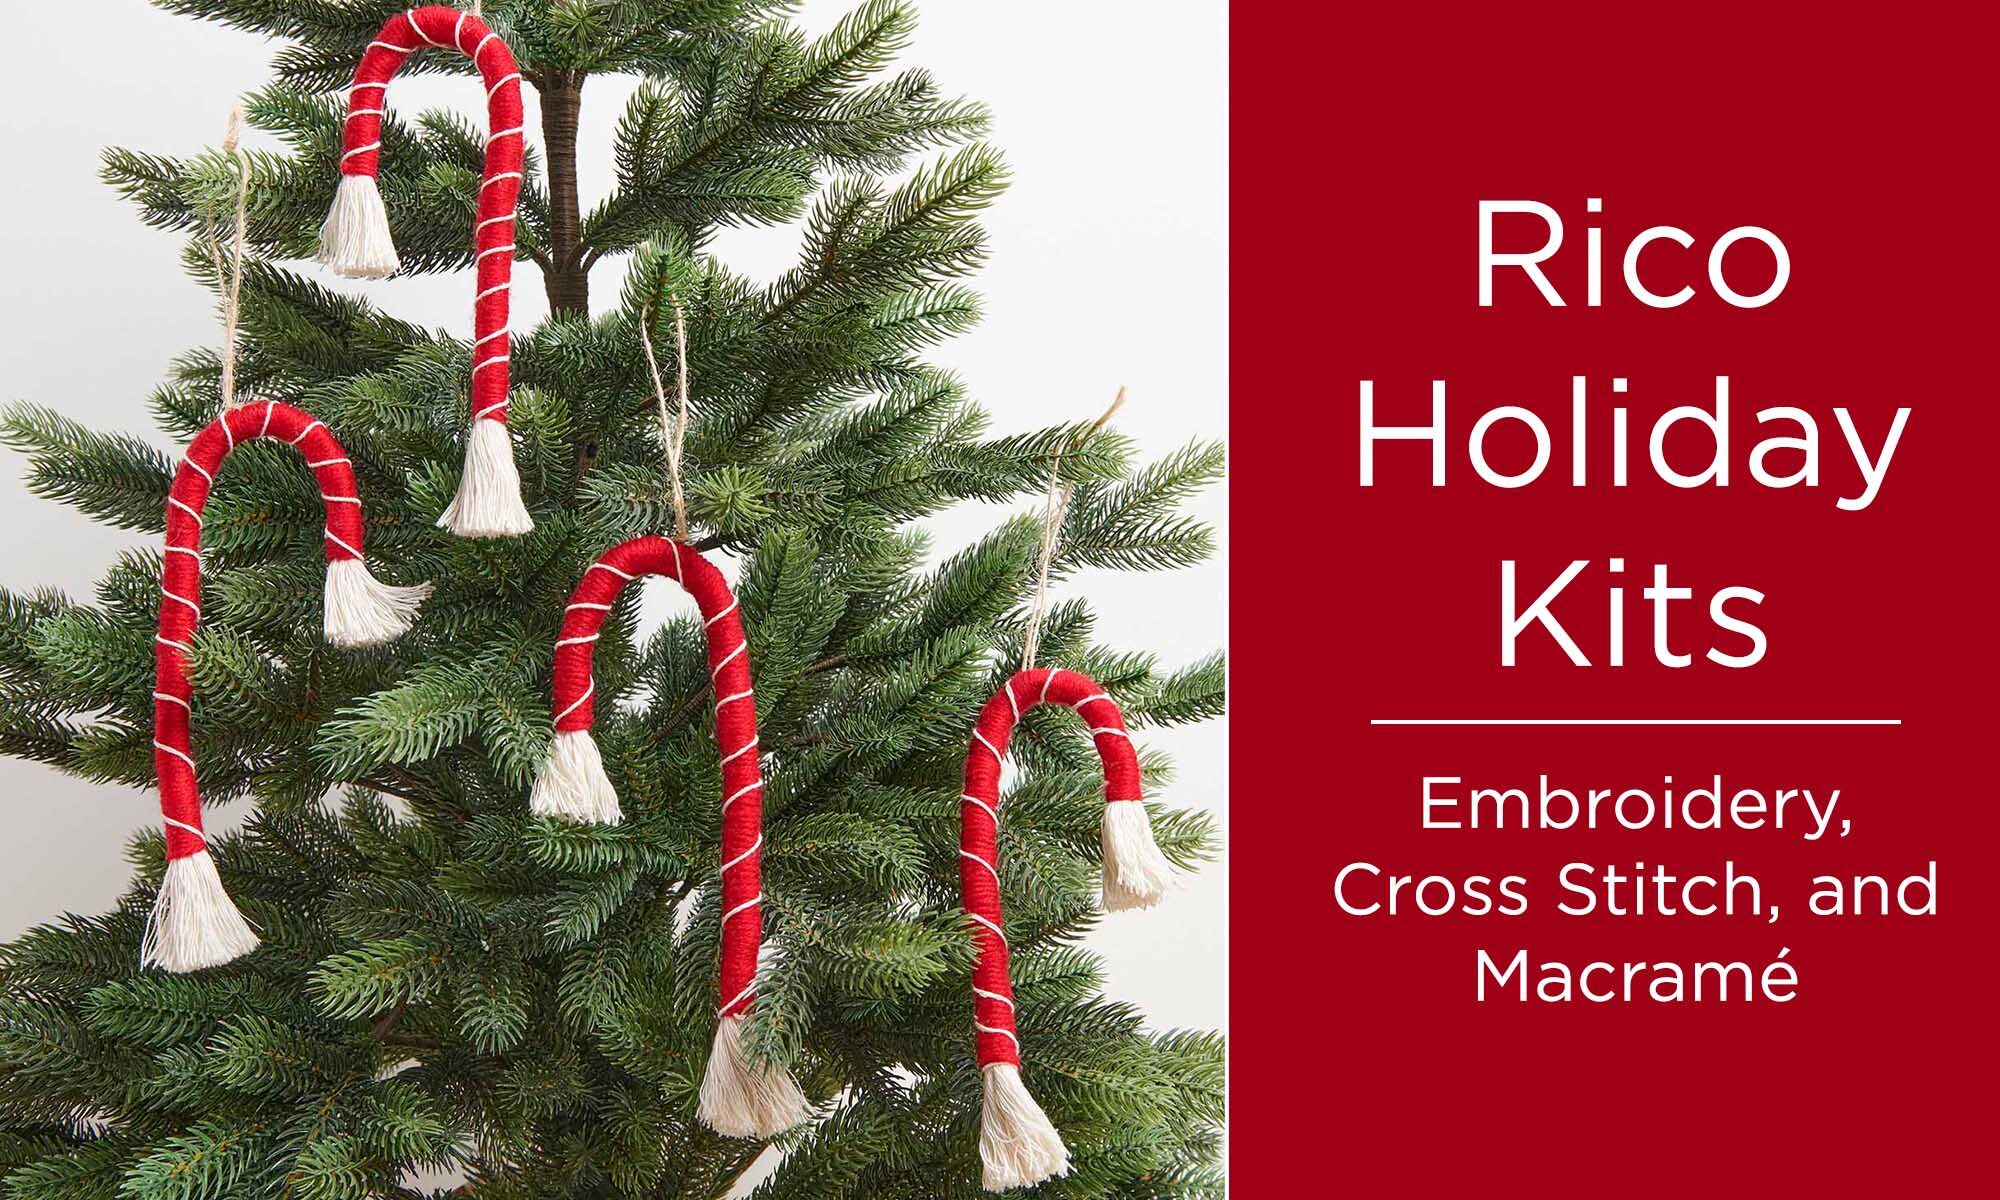 An image of a Christmas Tree with macramé candy canes is shown with a rad banner and text that reads "Rico Holiday Kits: Embroidery, Cross Stitch, and Macramé."